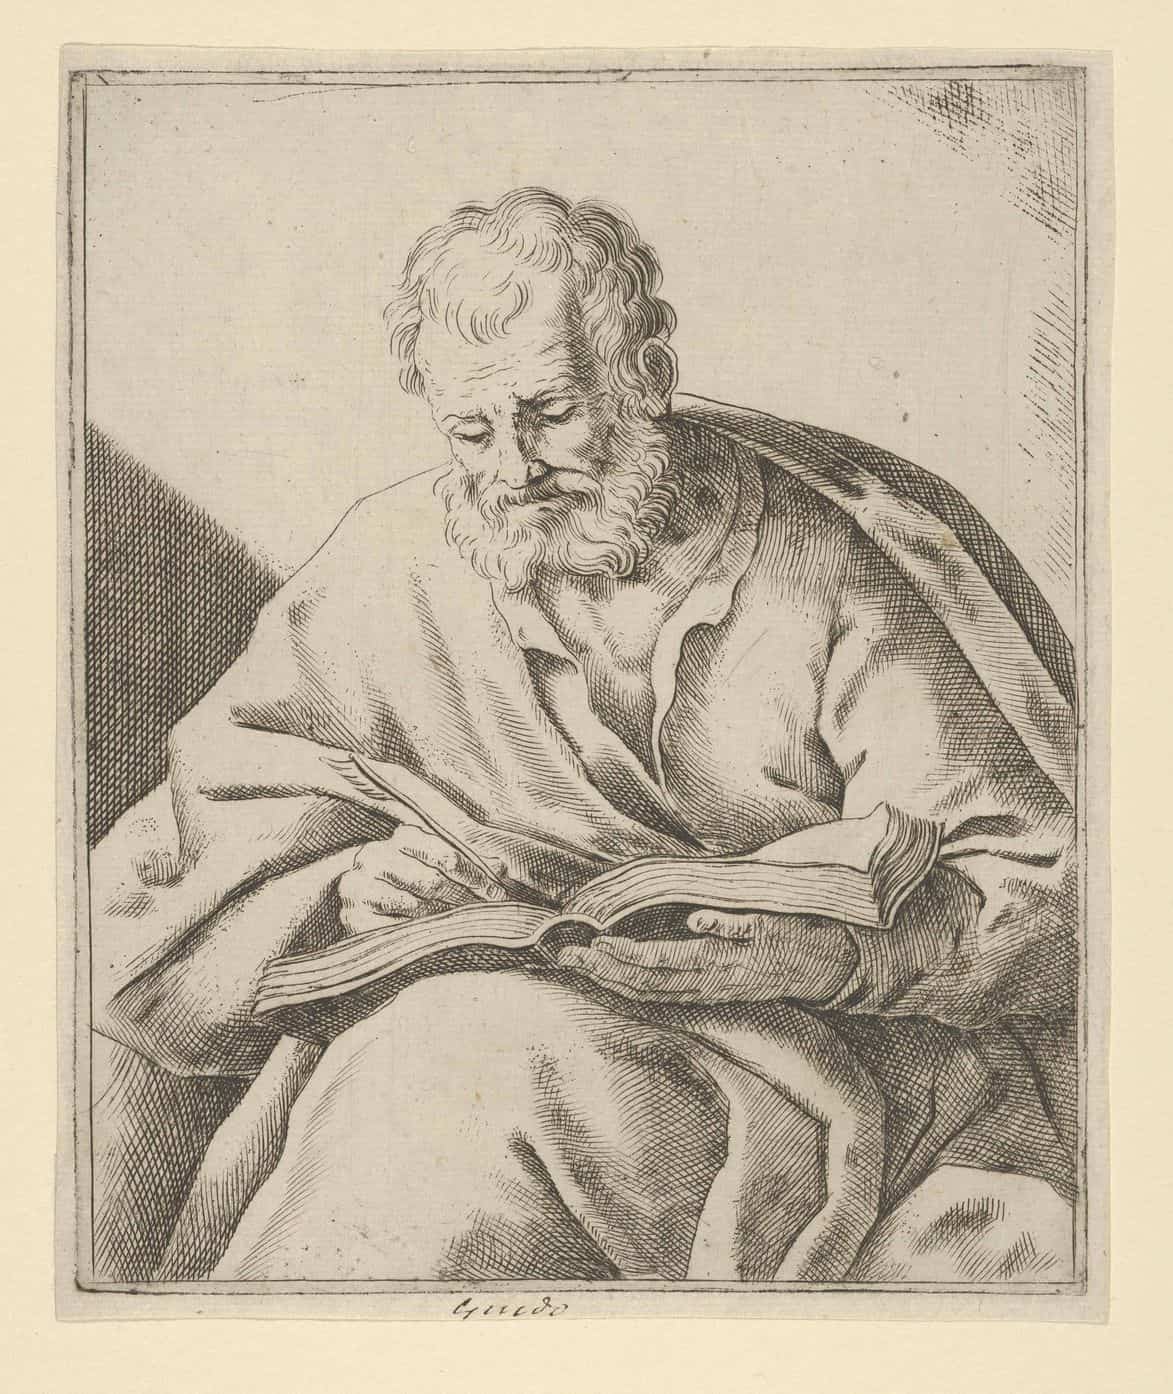 Seated Man Painting or Writing, first half 17th century, The Metropolitan Museum of Art (article on starting a journaling practice)